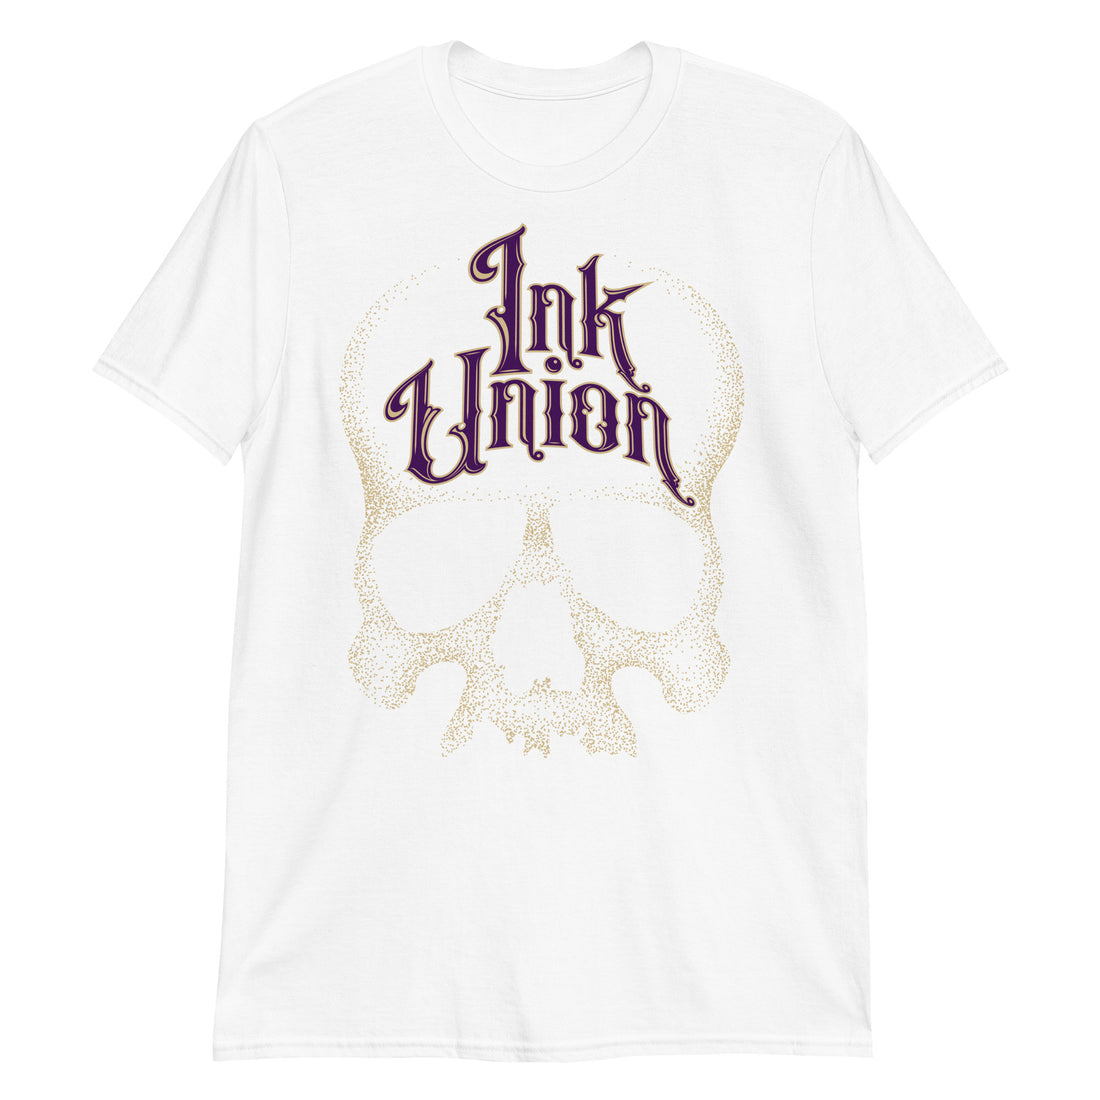 A white t-shirt adorned with a gold dot work human skull  and the words Ink Union in fancy gold and purple lettering across the forehead of the skull.